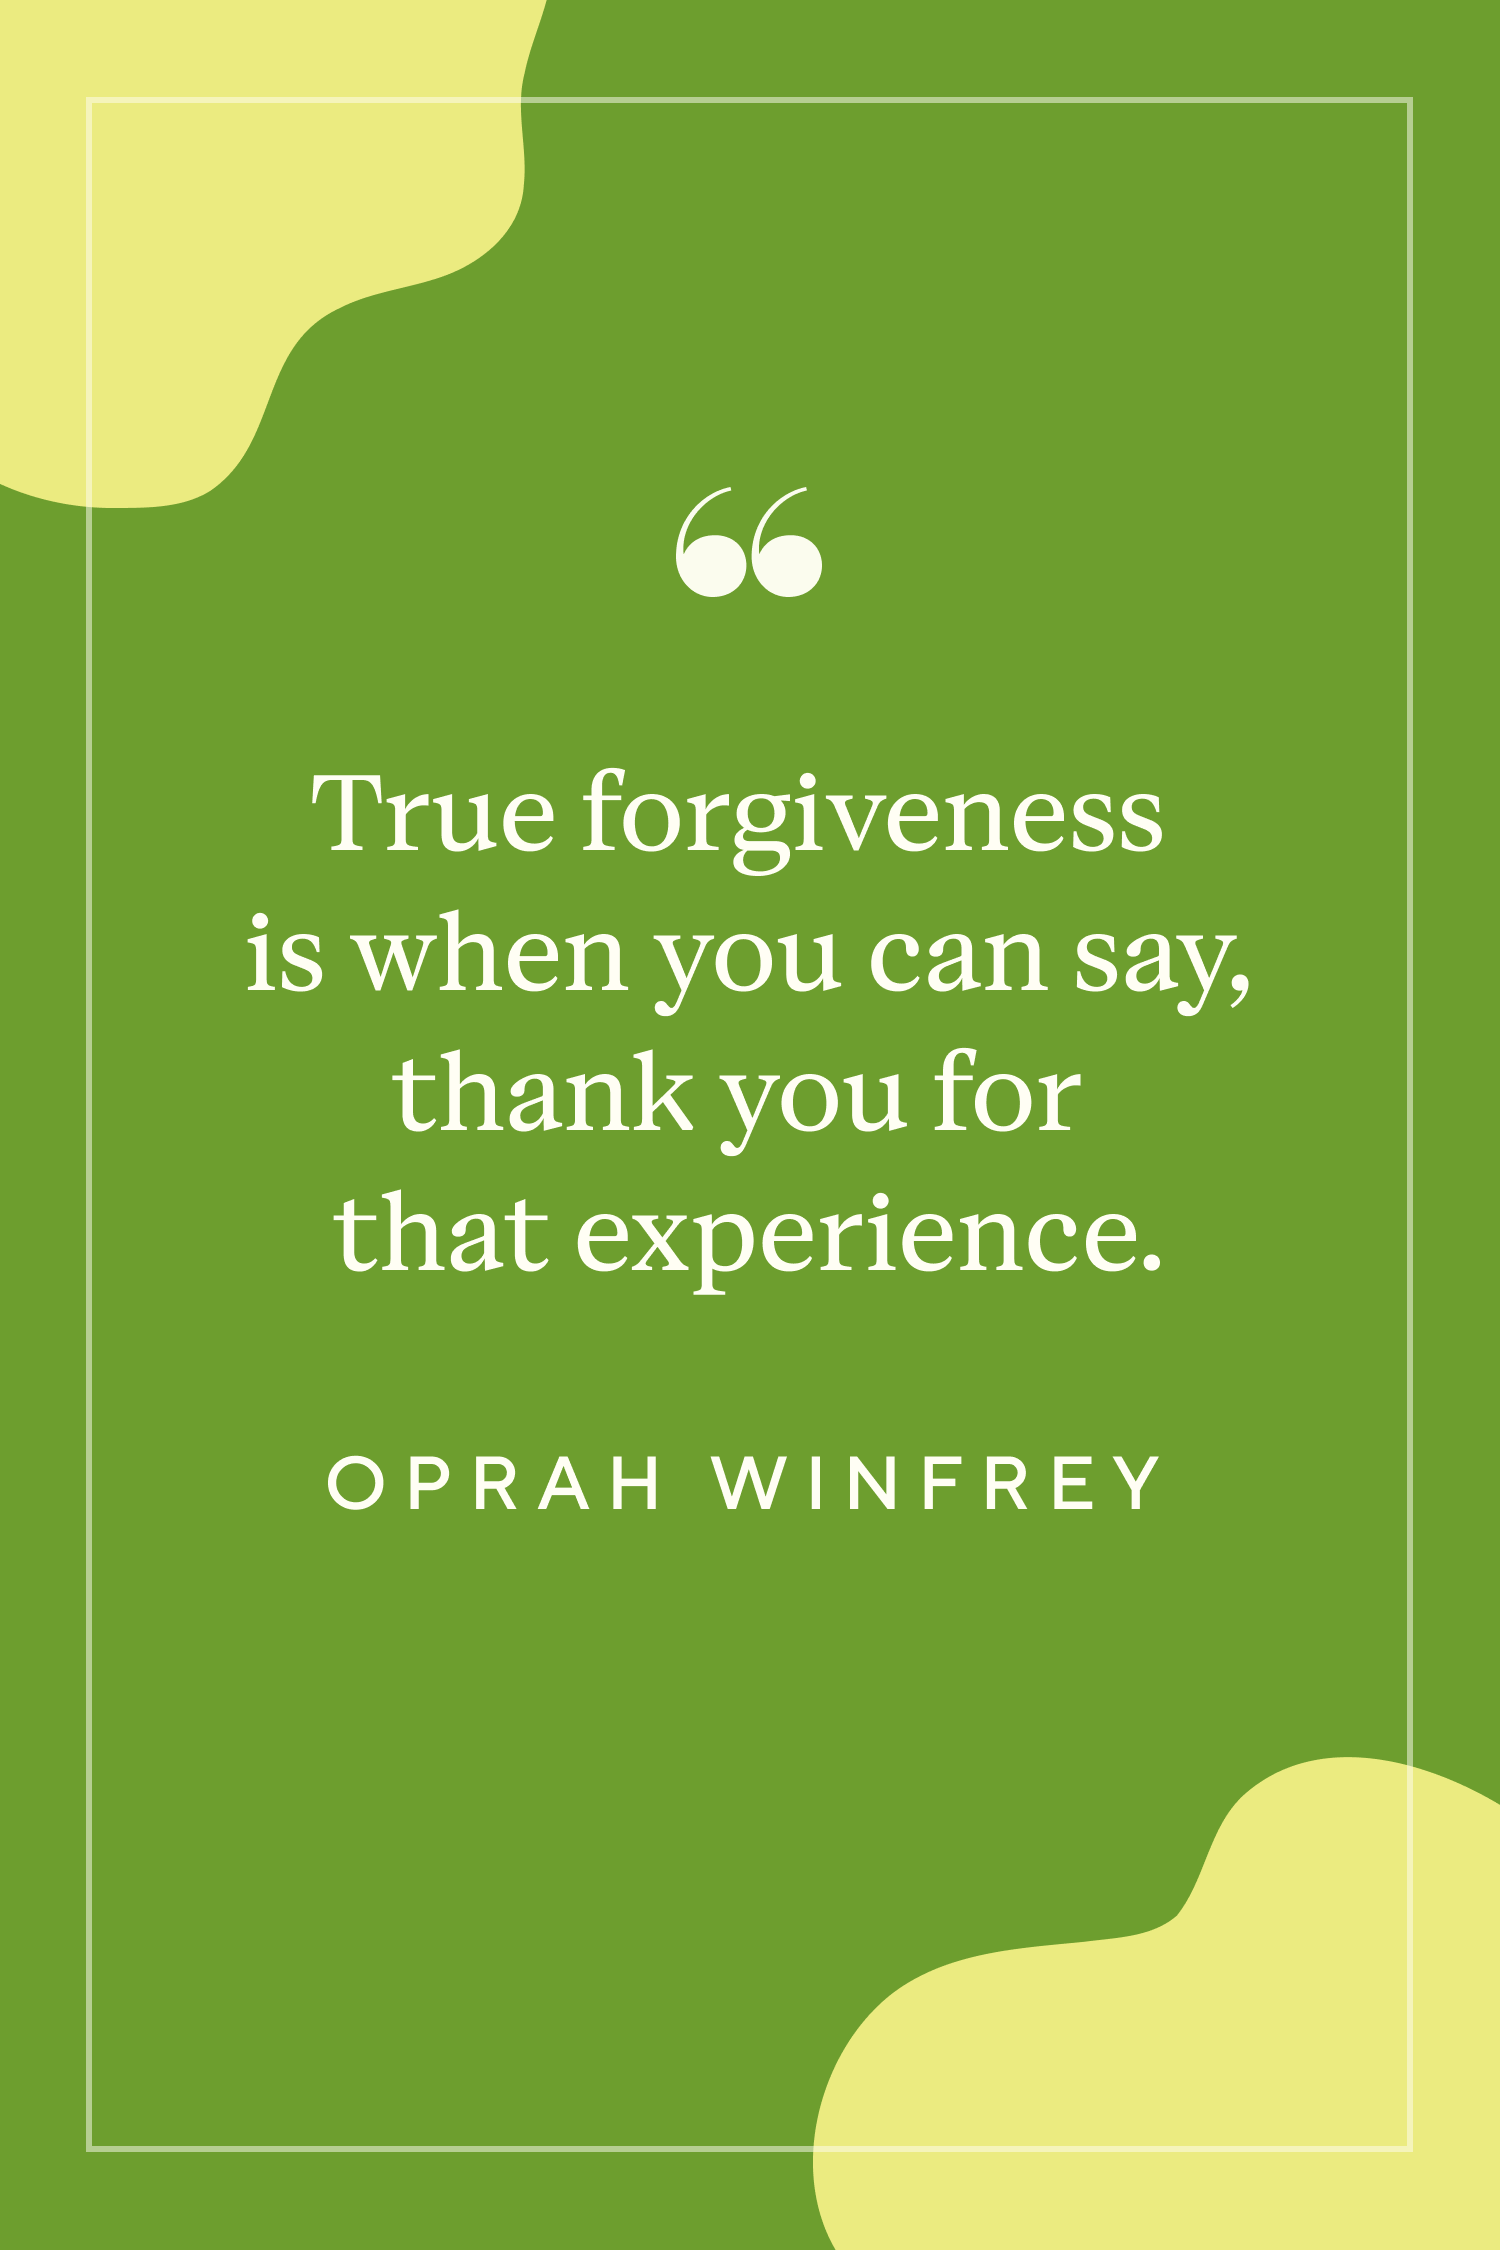 30 Forgiveness Quotes That'Ll Help You Move On